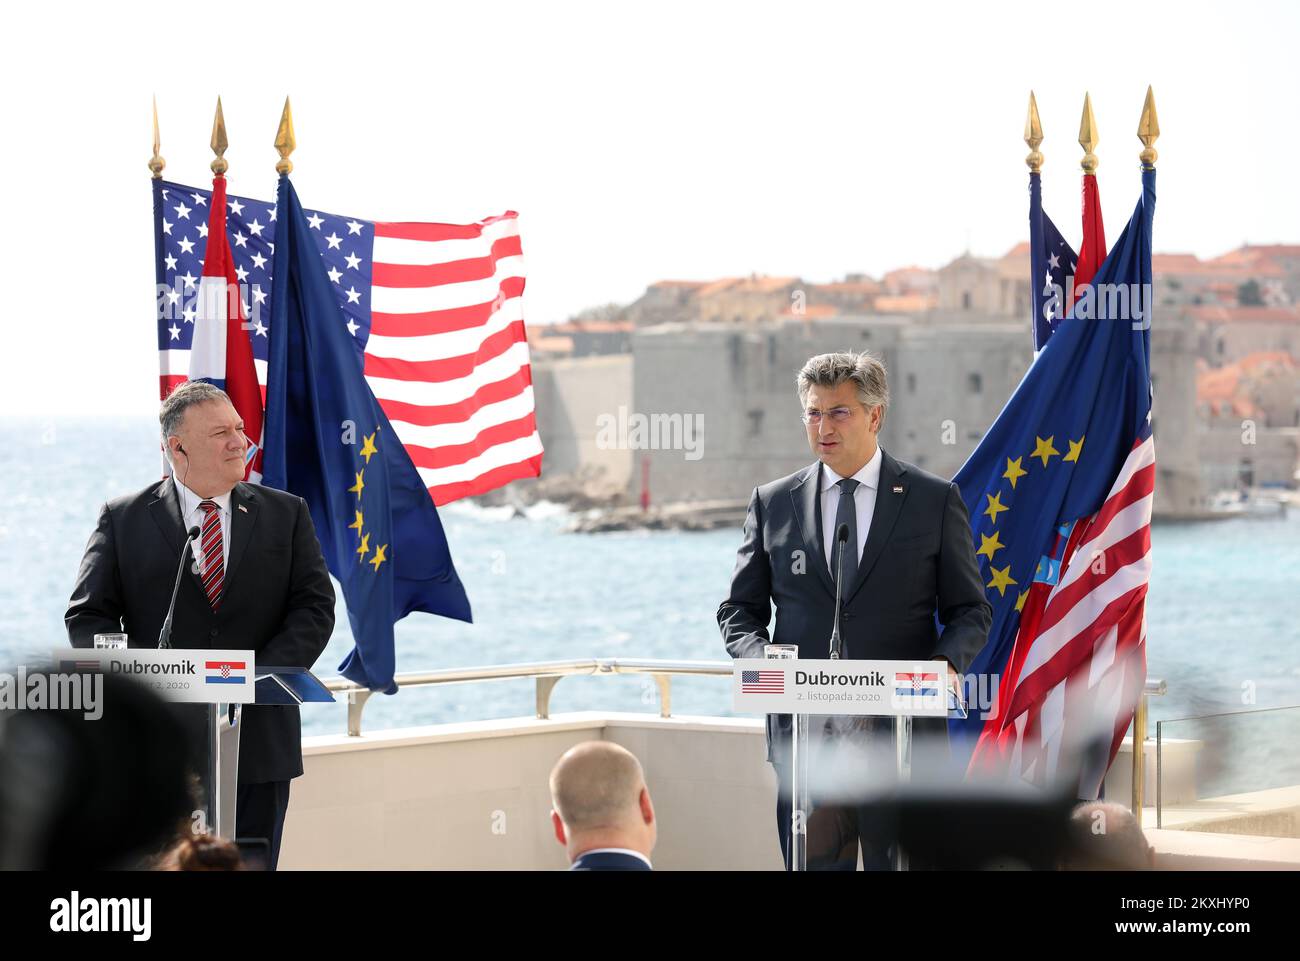 U.S. Secretary of State Mike Pompeo received by Croatia's Prime Minister Andrej Plenkovic as part of his European tour at Hotel Excelsior in Dubrovnik, Croatia, on October 02, 2020. They discuss about the abolishment of the visa requirement for Croatians traveling to the USA, Croatia's plan to purchase fighter jets F-16 block 70 and opportunities for closer cooperation between the United States and Croatia in key areas of mutual concern, including defense cooperation, the growing U.S.-Croatia investment relationship, and Croatiaâ€™s strong efforts to advance Western Balkan integration. Photo:  Stock Photo